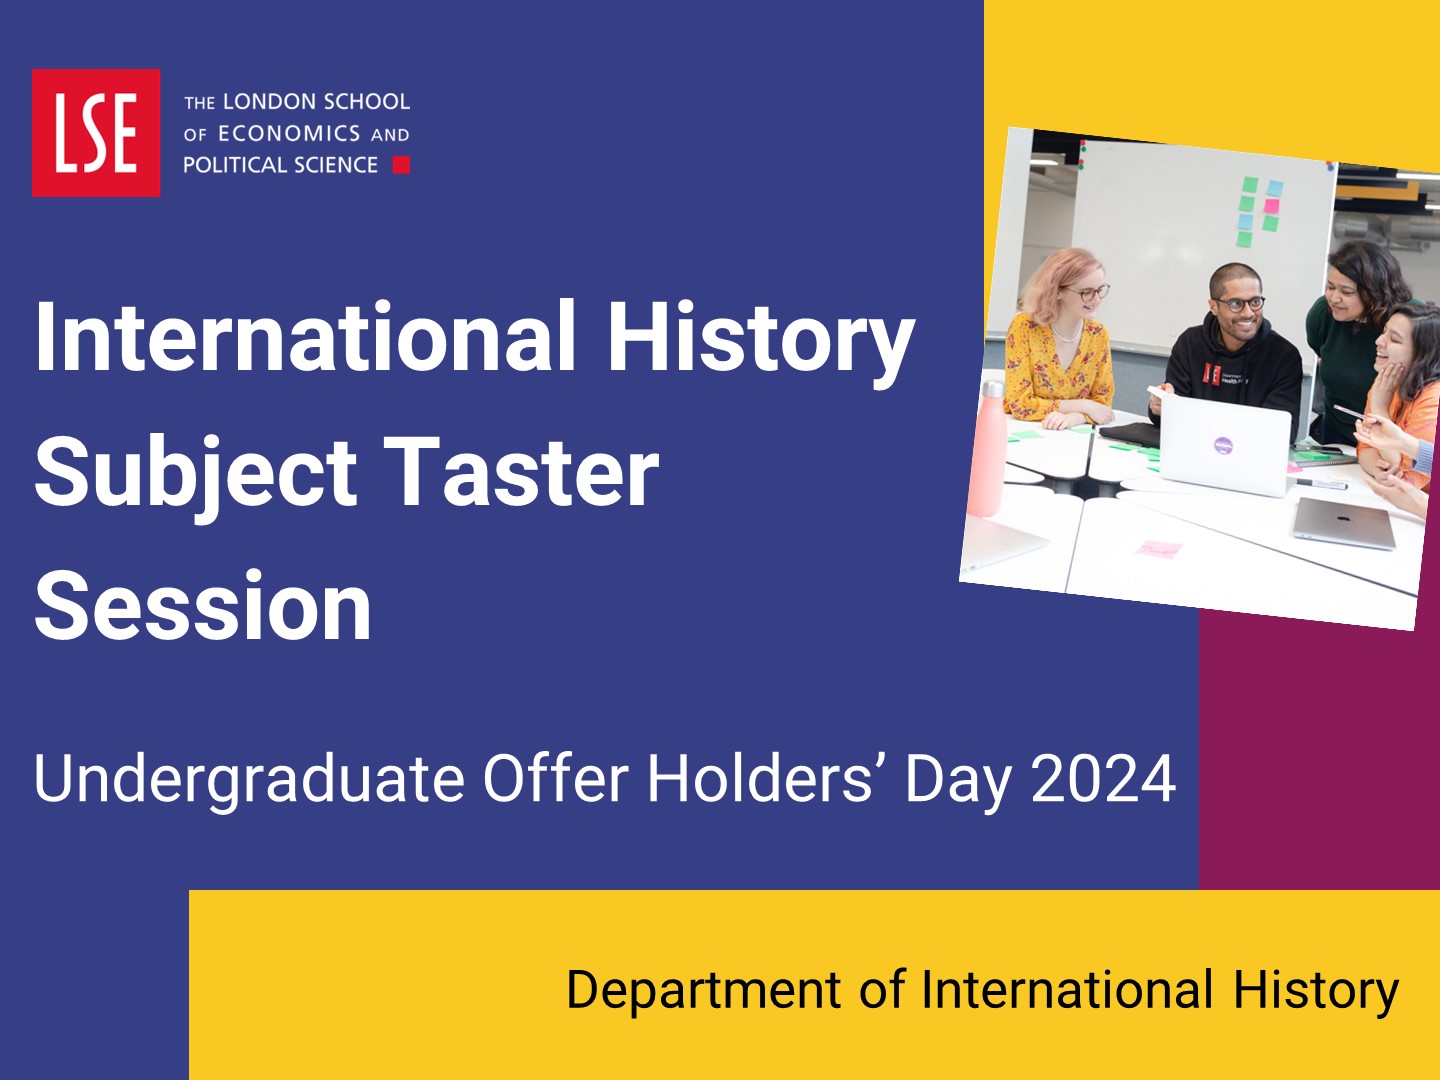 Watch the international history subject taster session